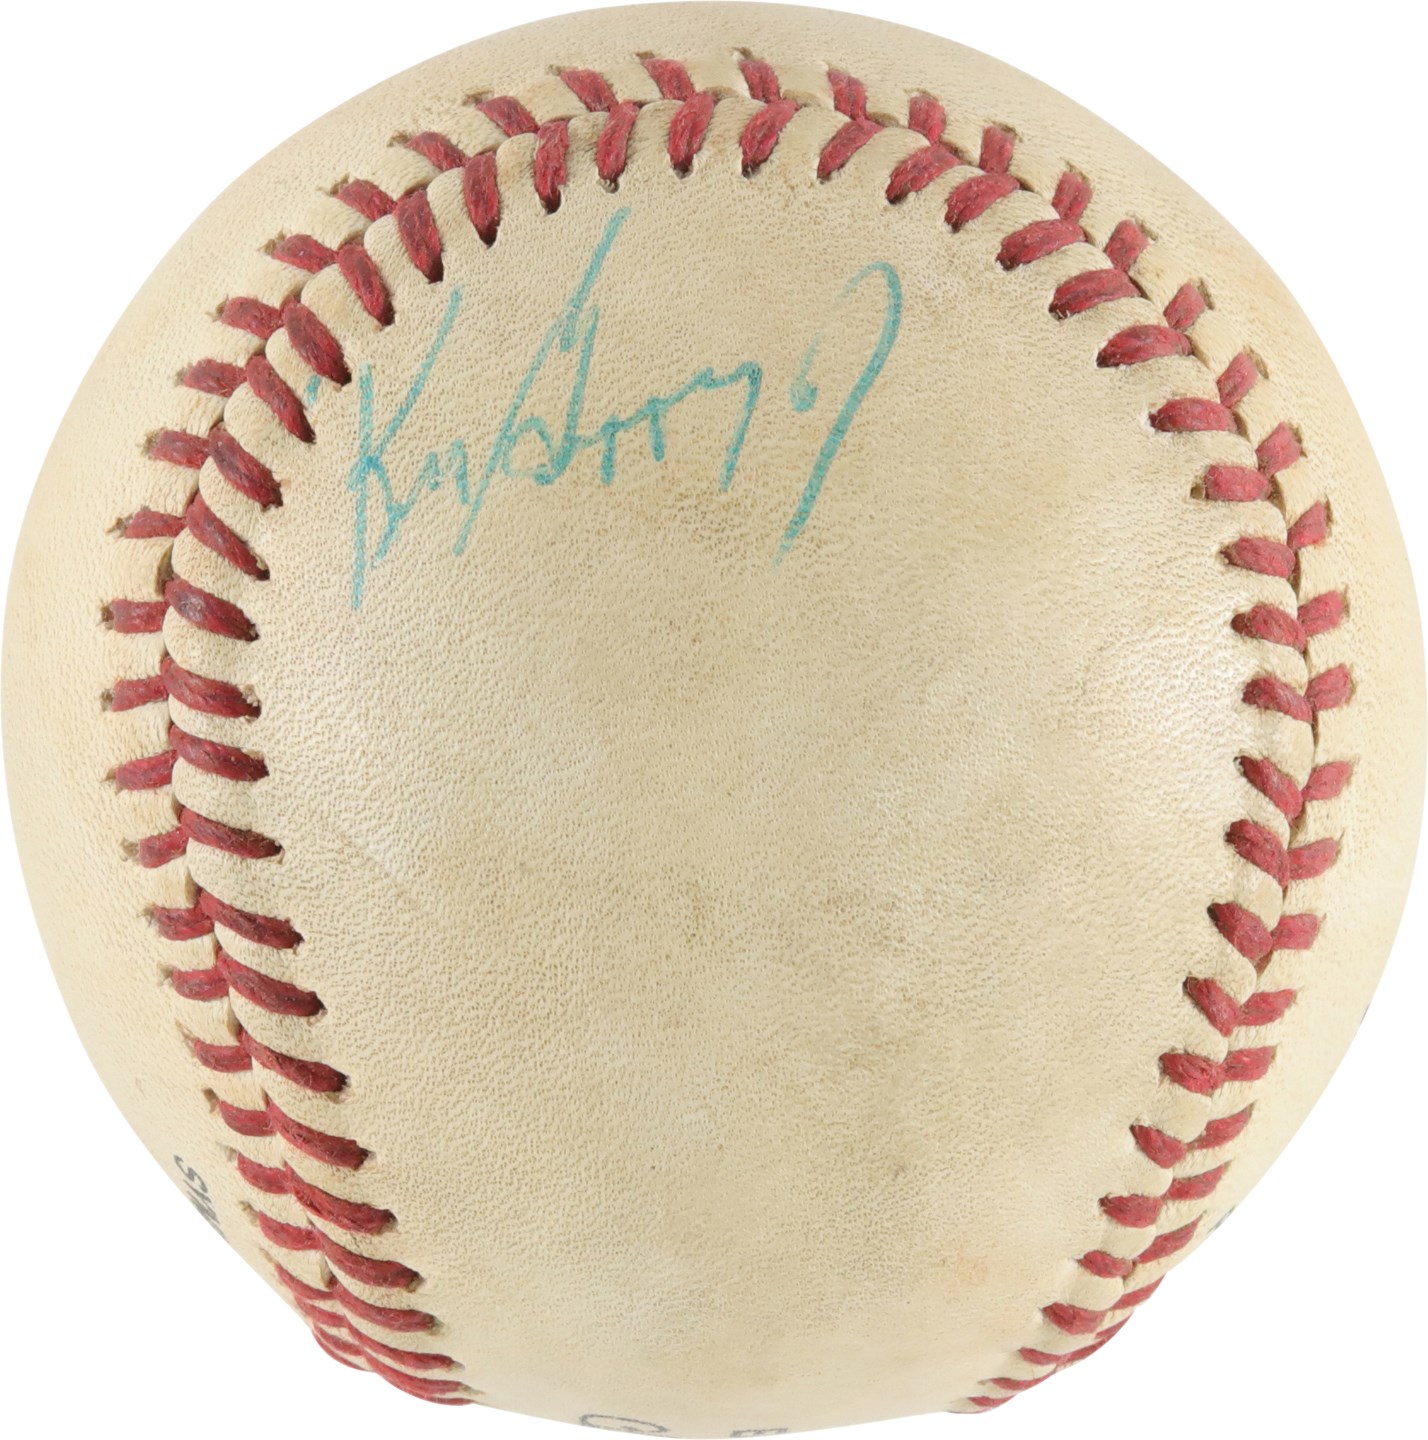 Baseball Equipment - 1988 Ken Griffey Jr Signed Game Used Baseball Attributed to First Home Run with Vermont Mariners